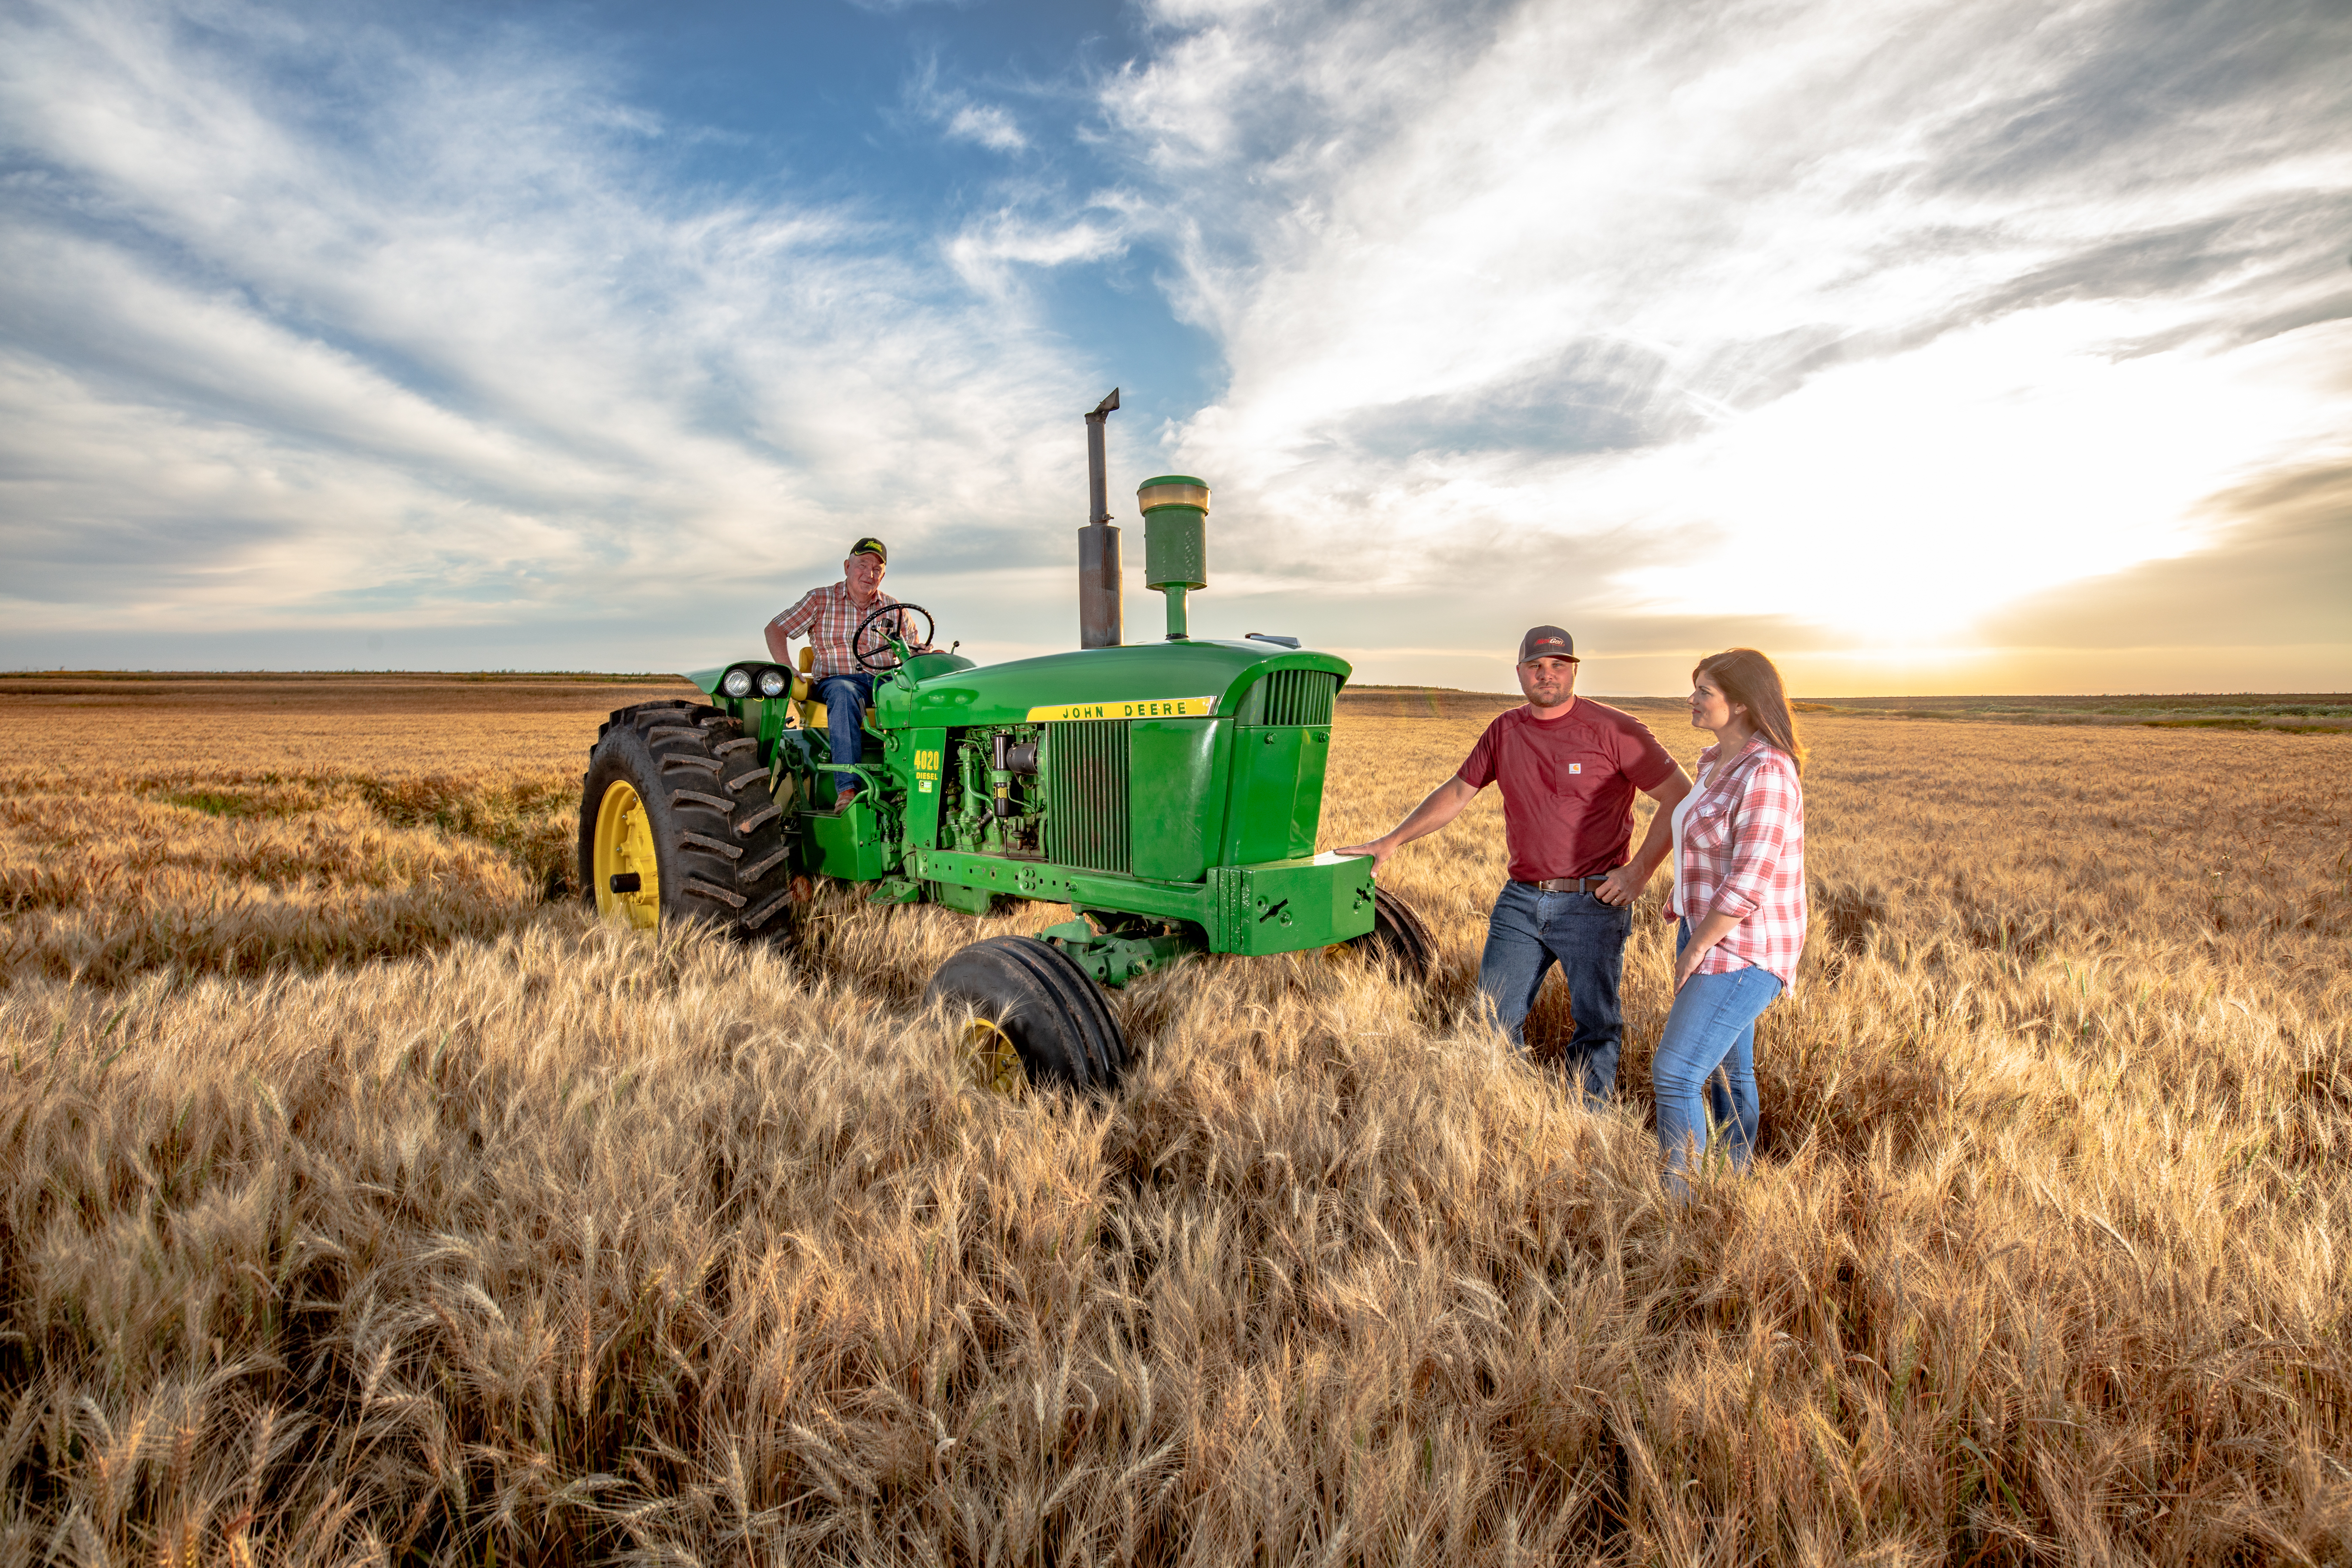 the hunt family poses in their fields at sunset with their tractor